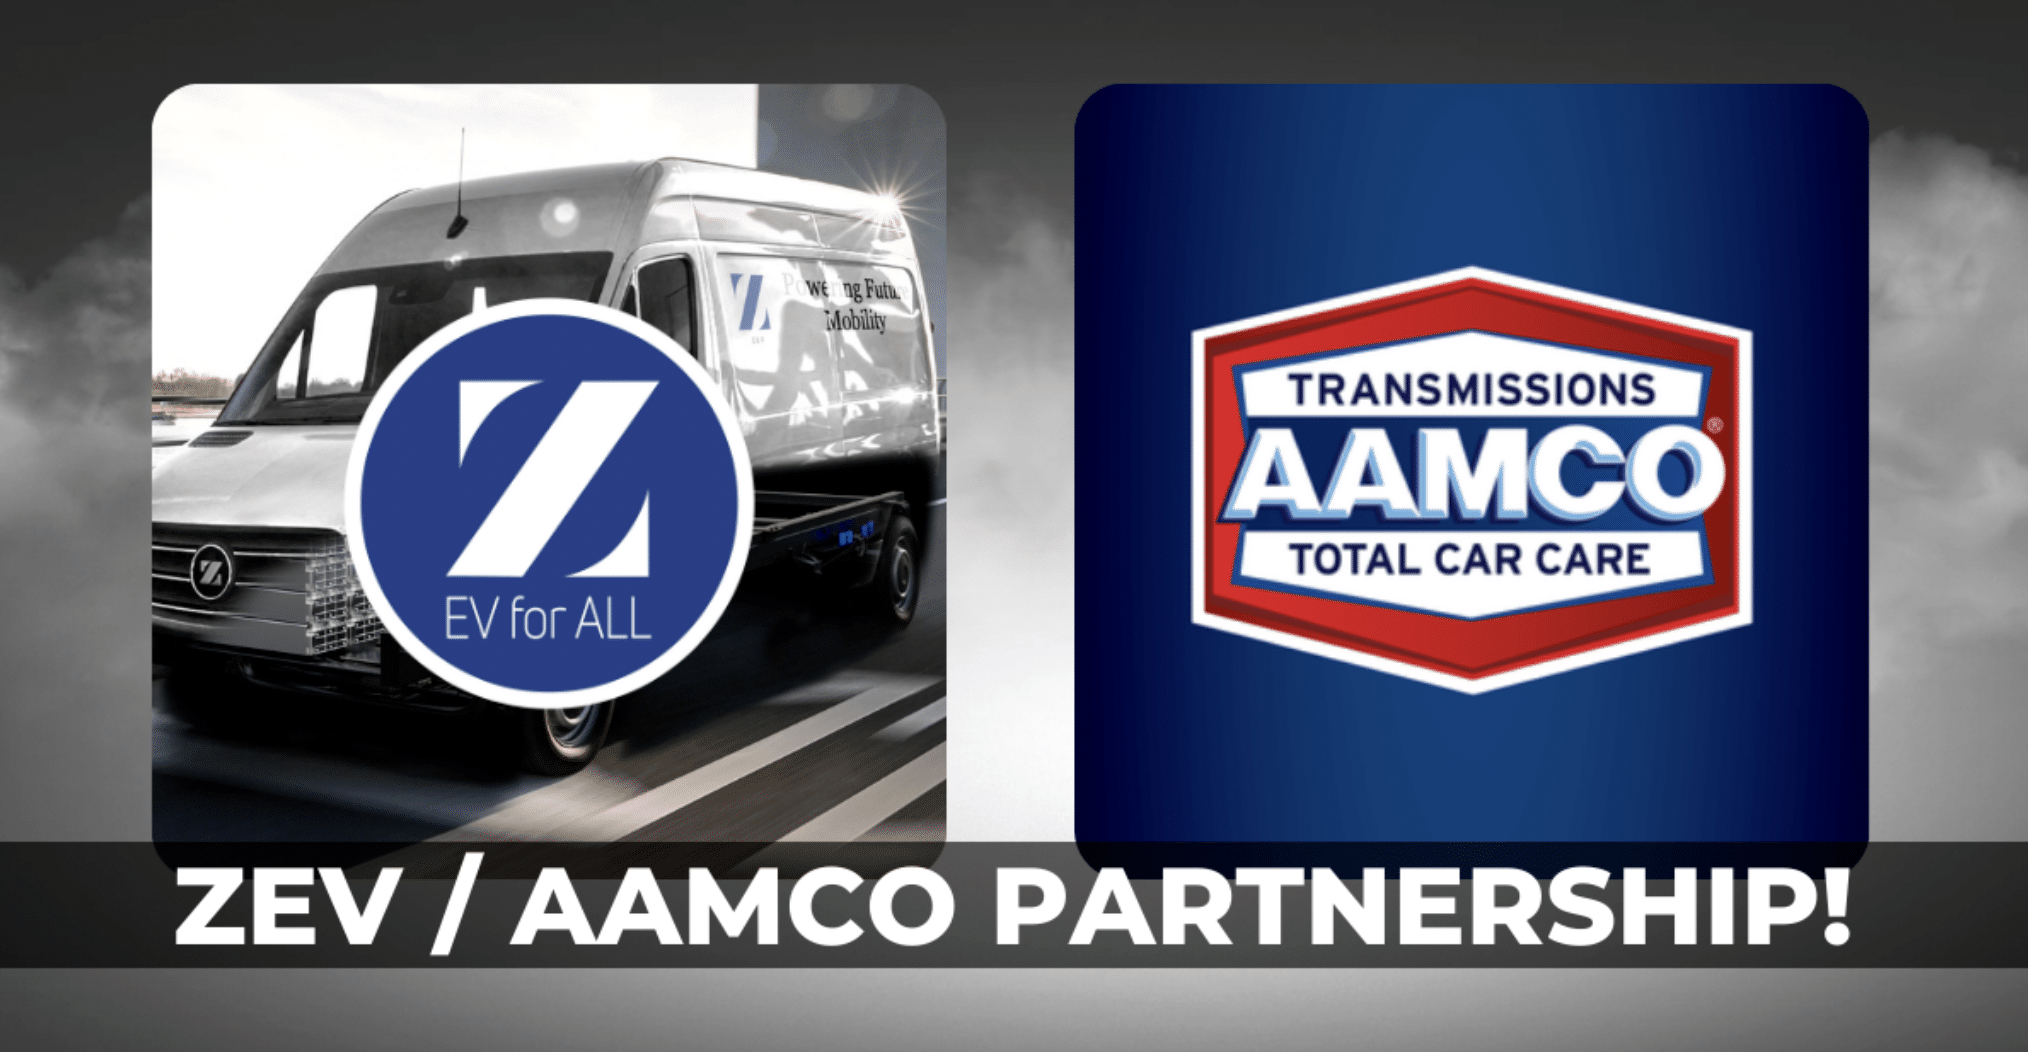 Zero Electric Vehicles, Inc. (ZEV) Partners with AAMCO Transmissions and Total Car Care to Electrify Vehicles